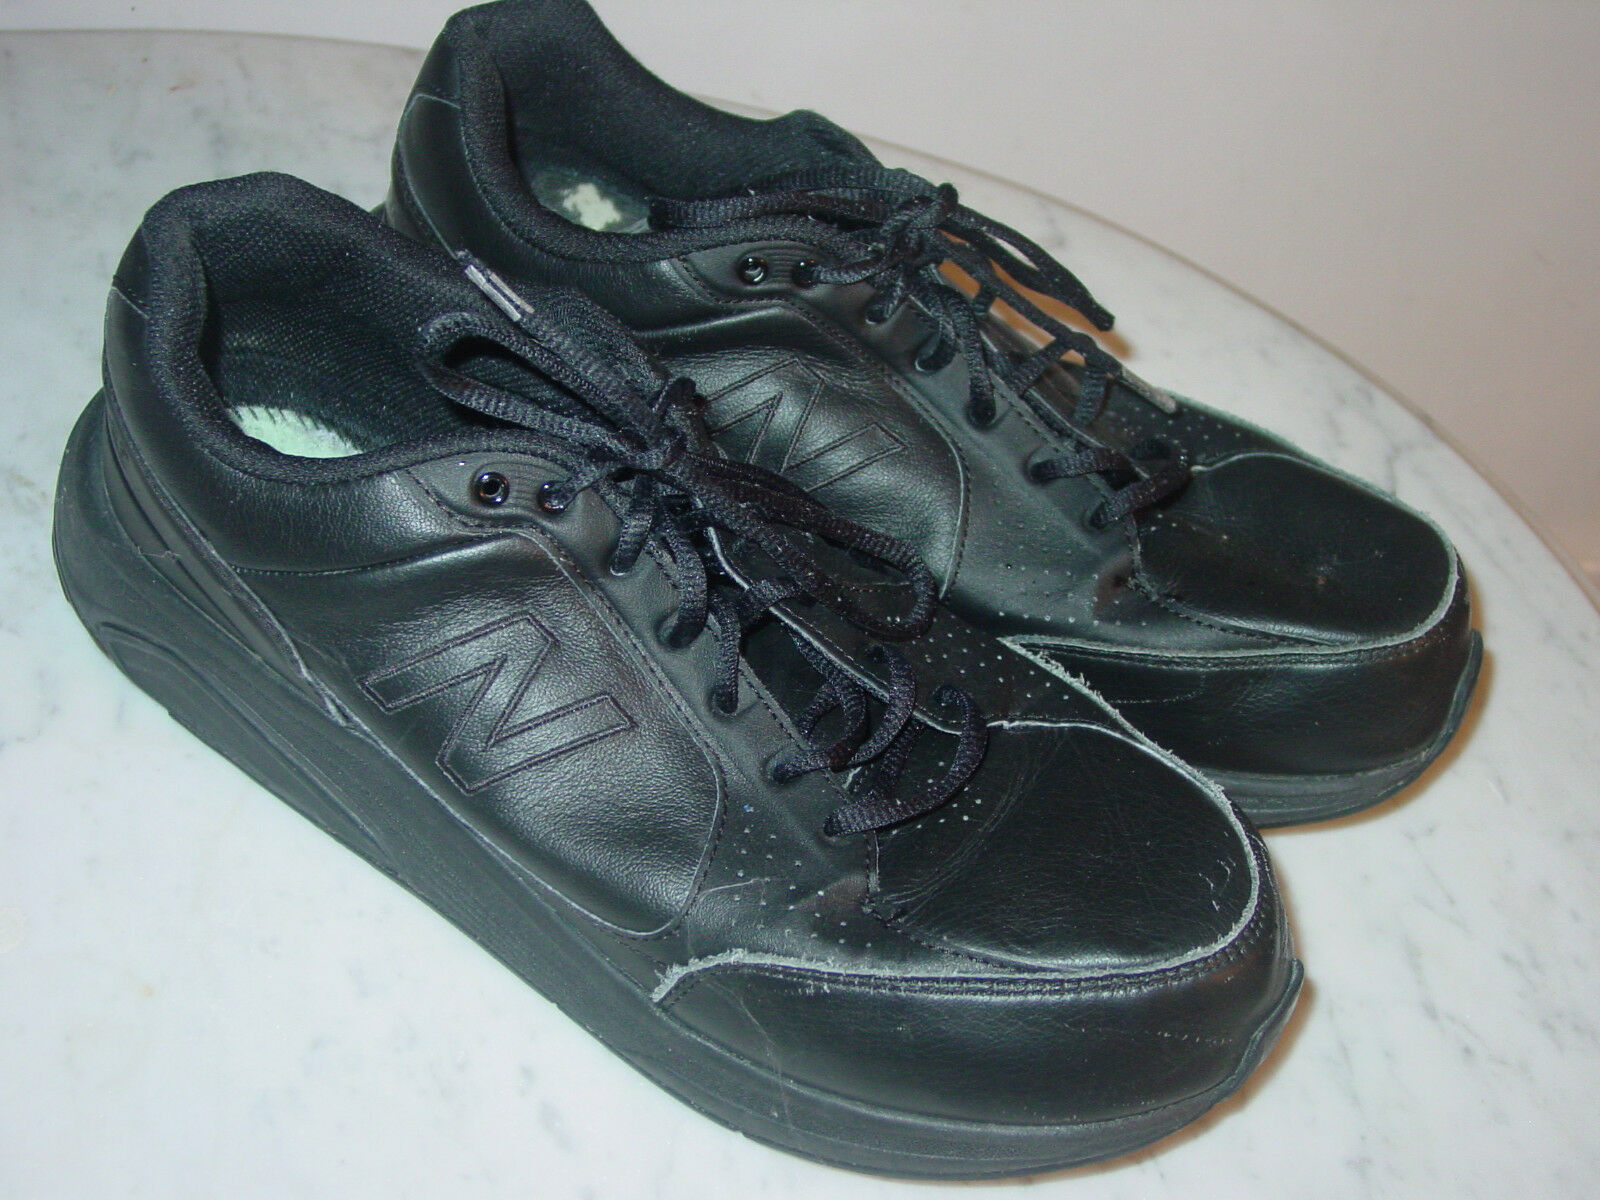 Mens New Balance 928 "MW928BK" Black Walking Shoes! Size 11XXW Sold As Is!